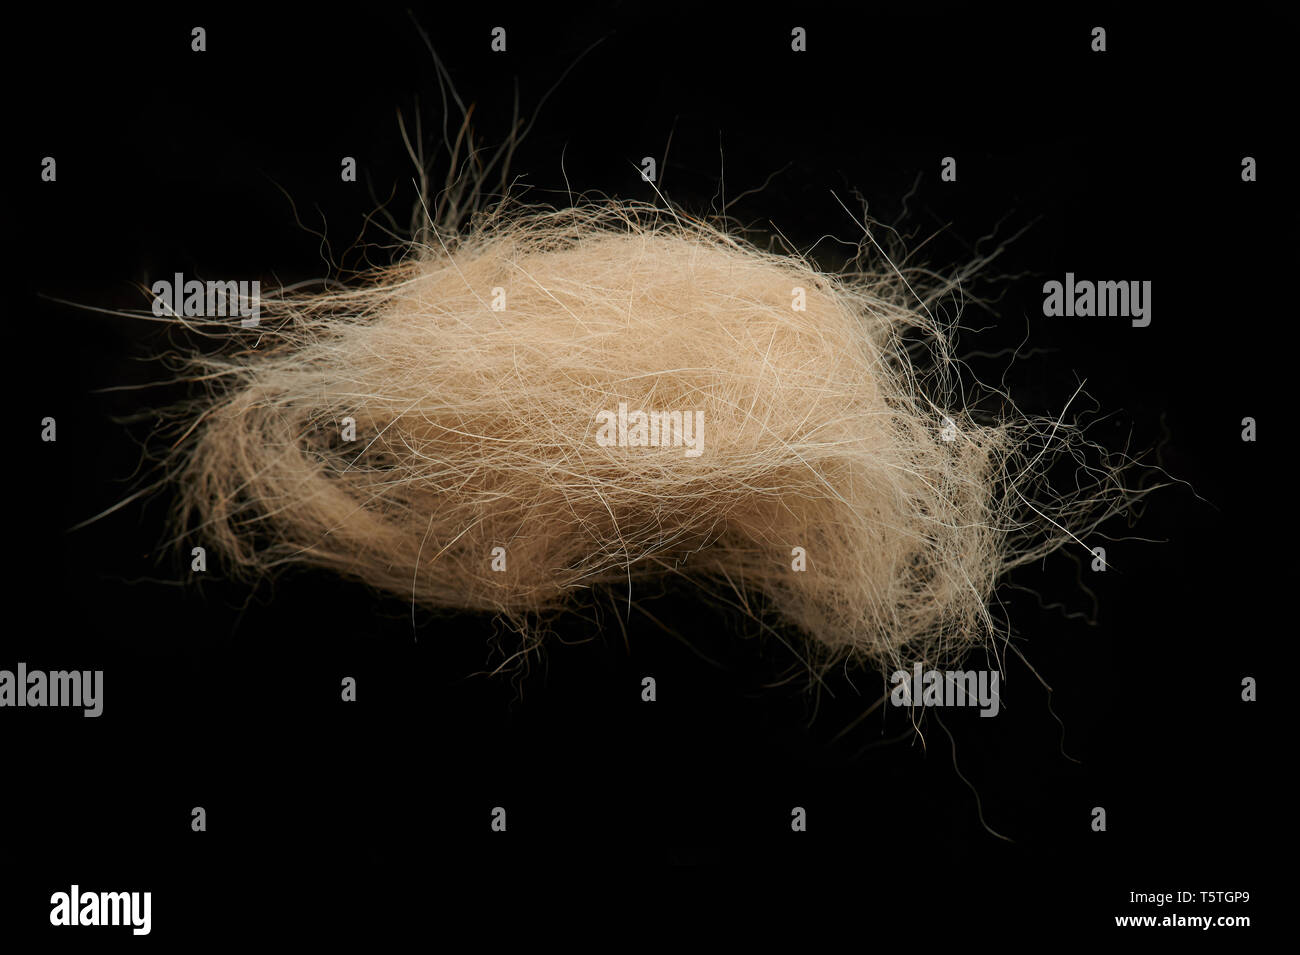 Brown animal fur clump close up isolated on black studio background Stock Photo